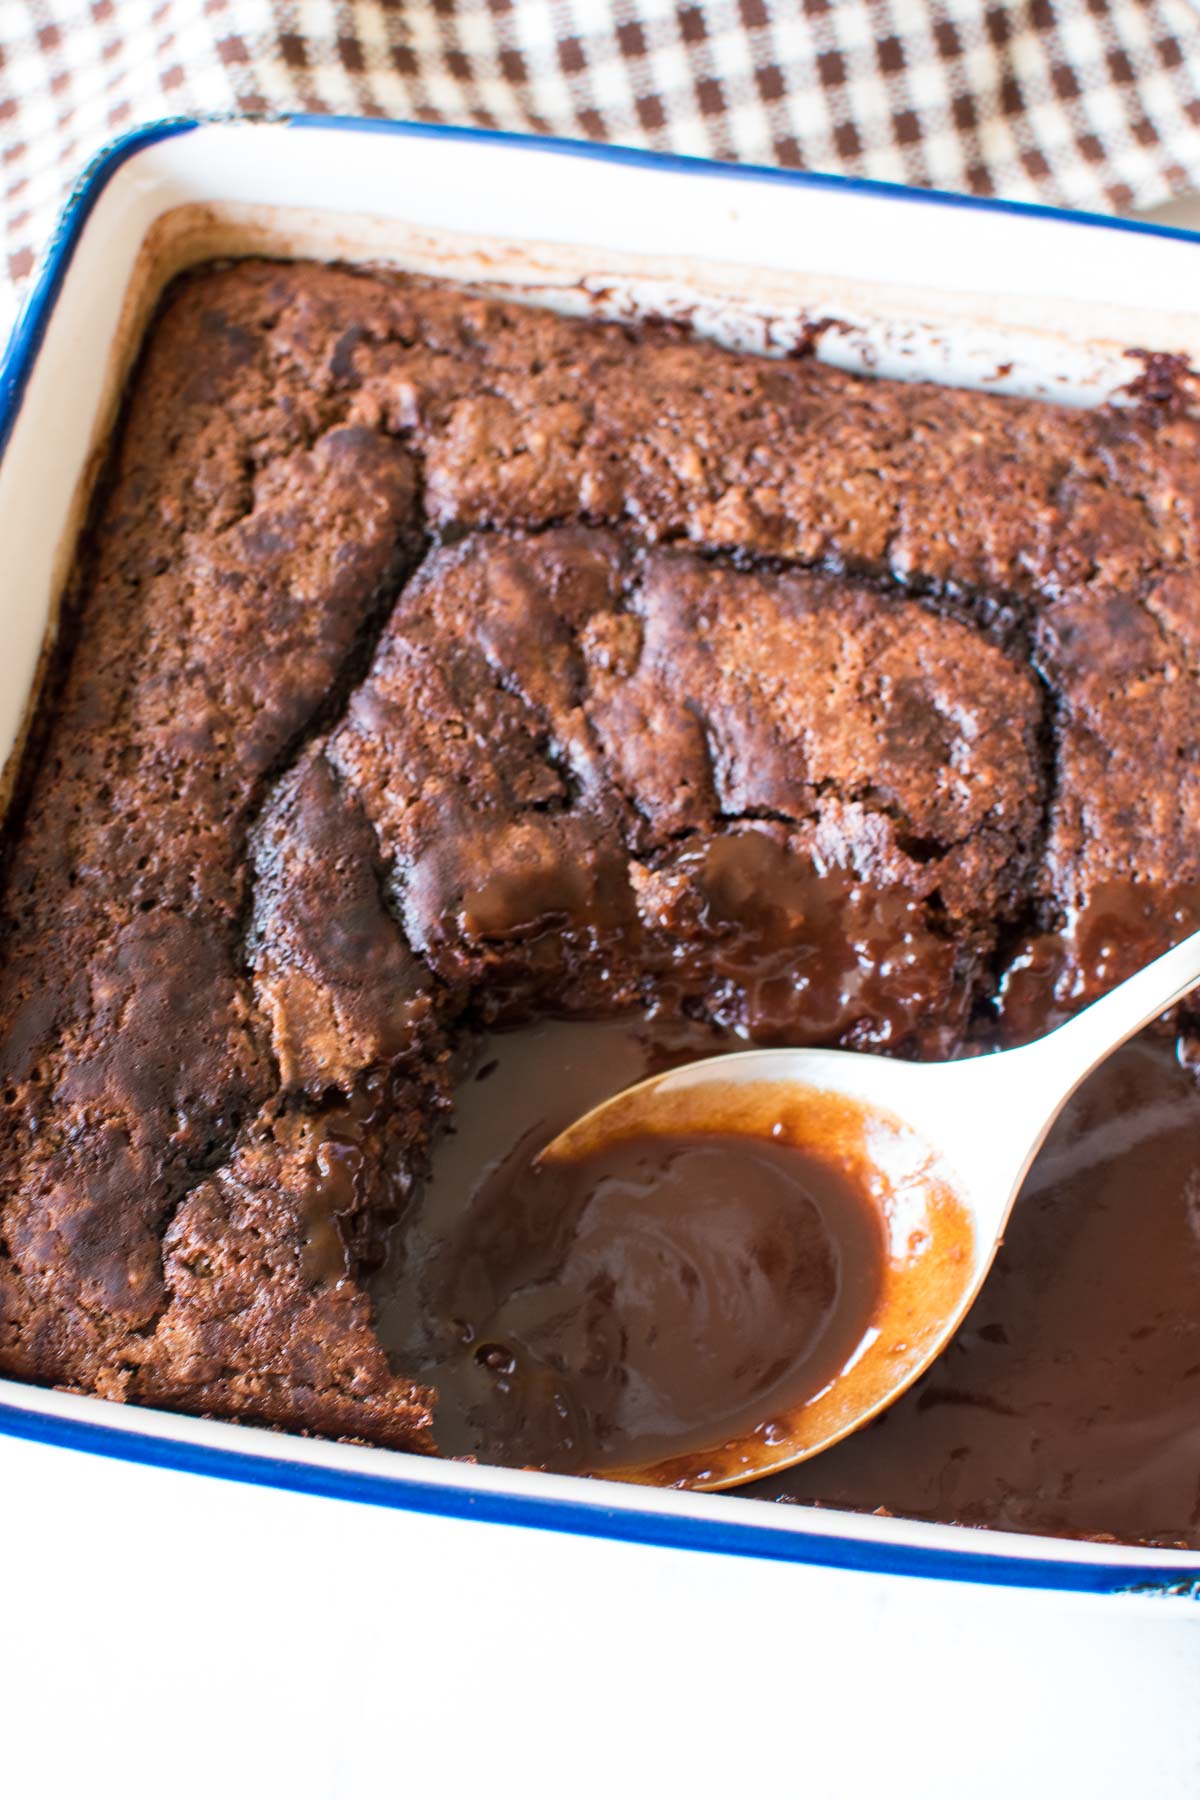 A baking dish with chocolate cake and hot fudge sauce.